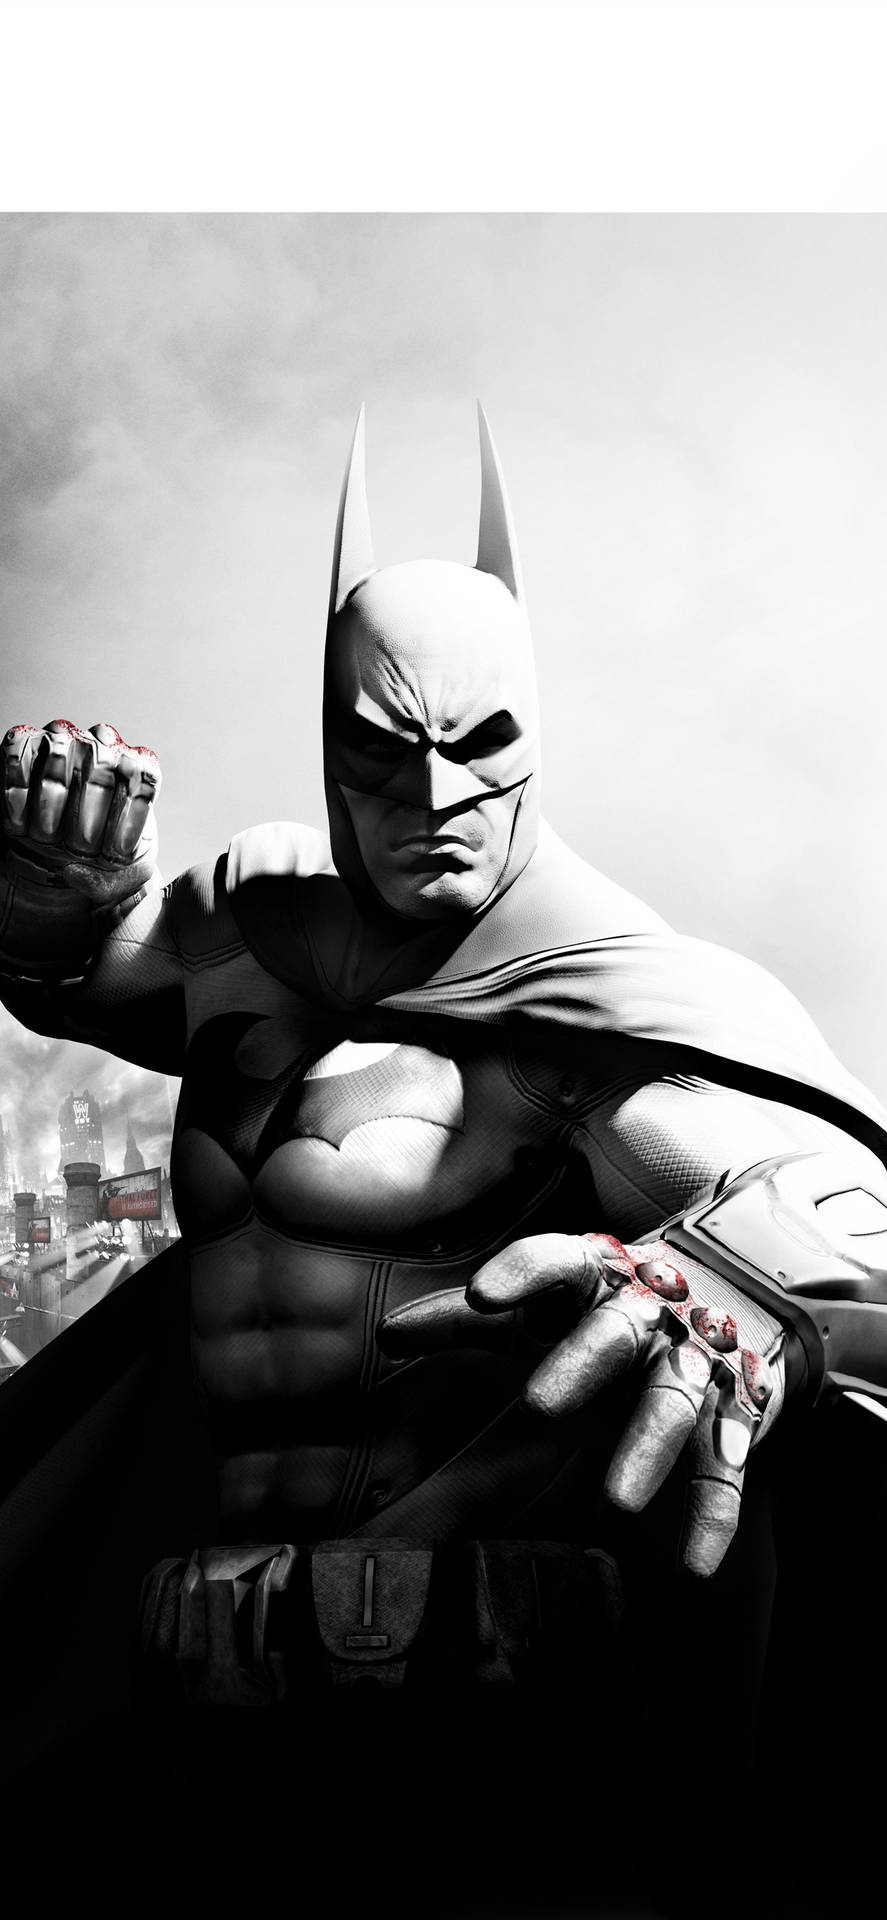 Batman Arkham iPhone With Bloodied Knuckles Wallpaper